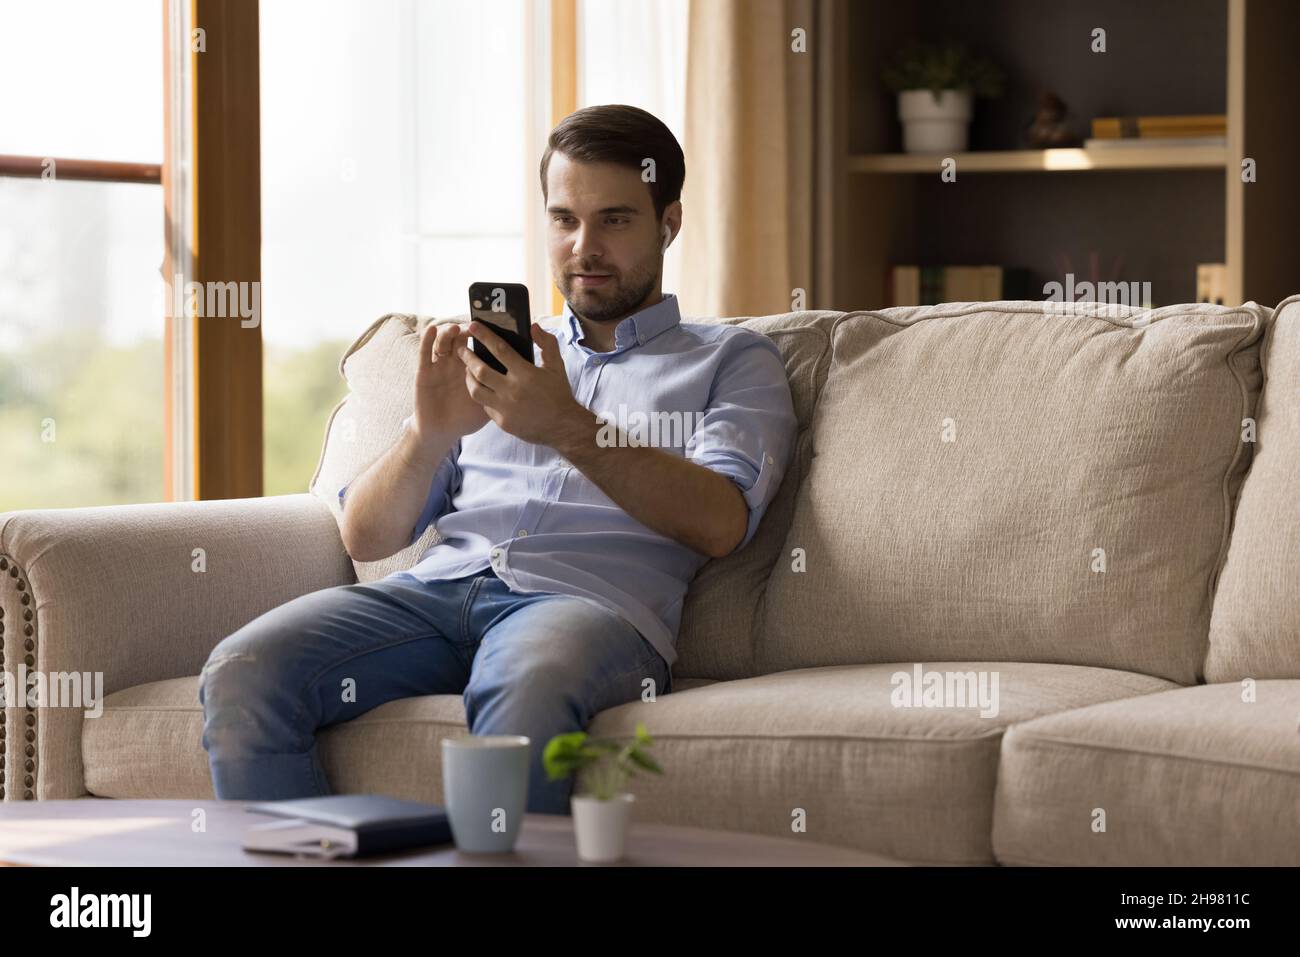 Millennial guy with earphones using media app on mobile phone Stock Photo